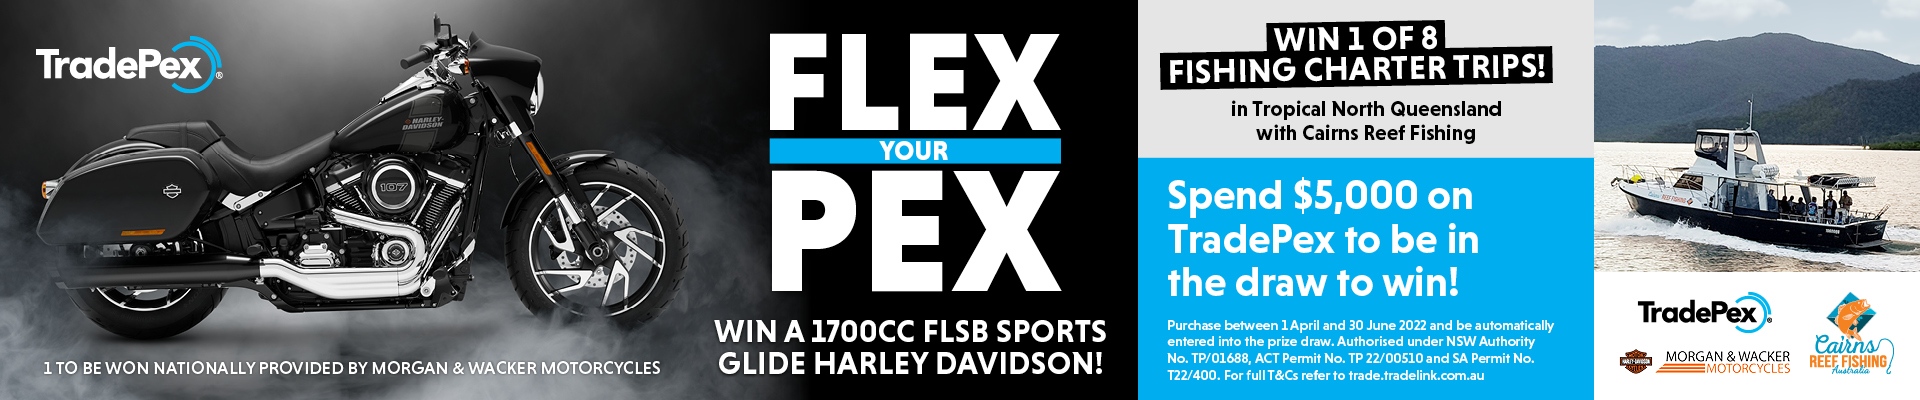 Flex Your Pex and Win a Harley Davidson